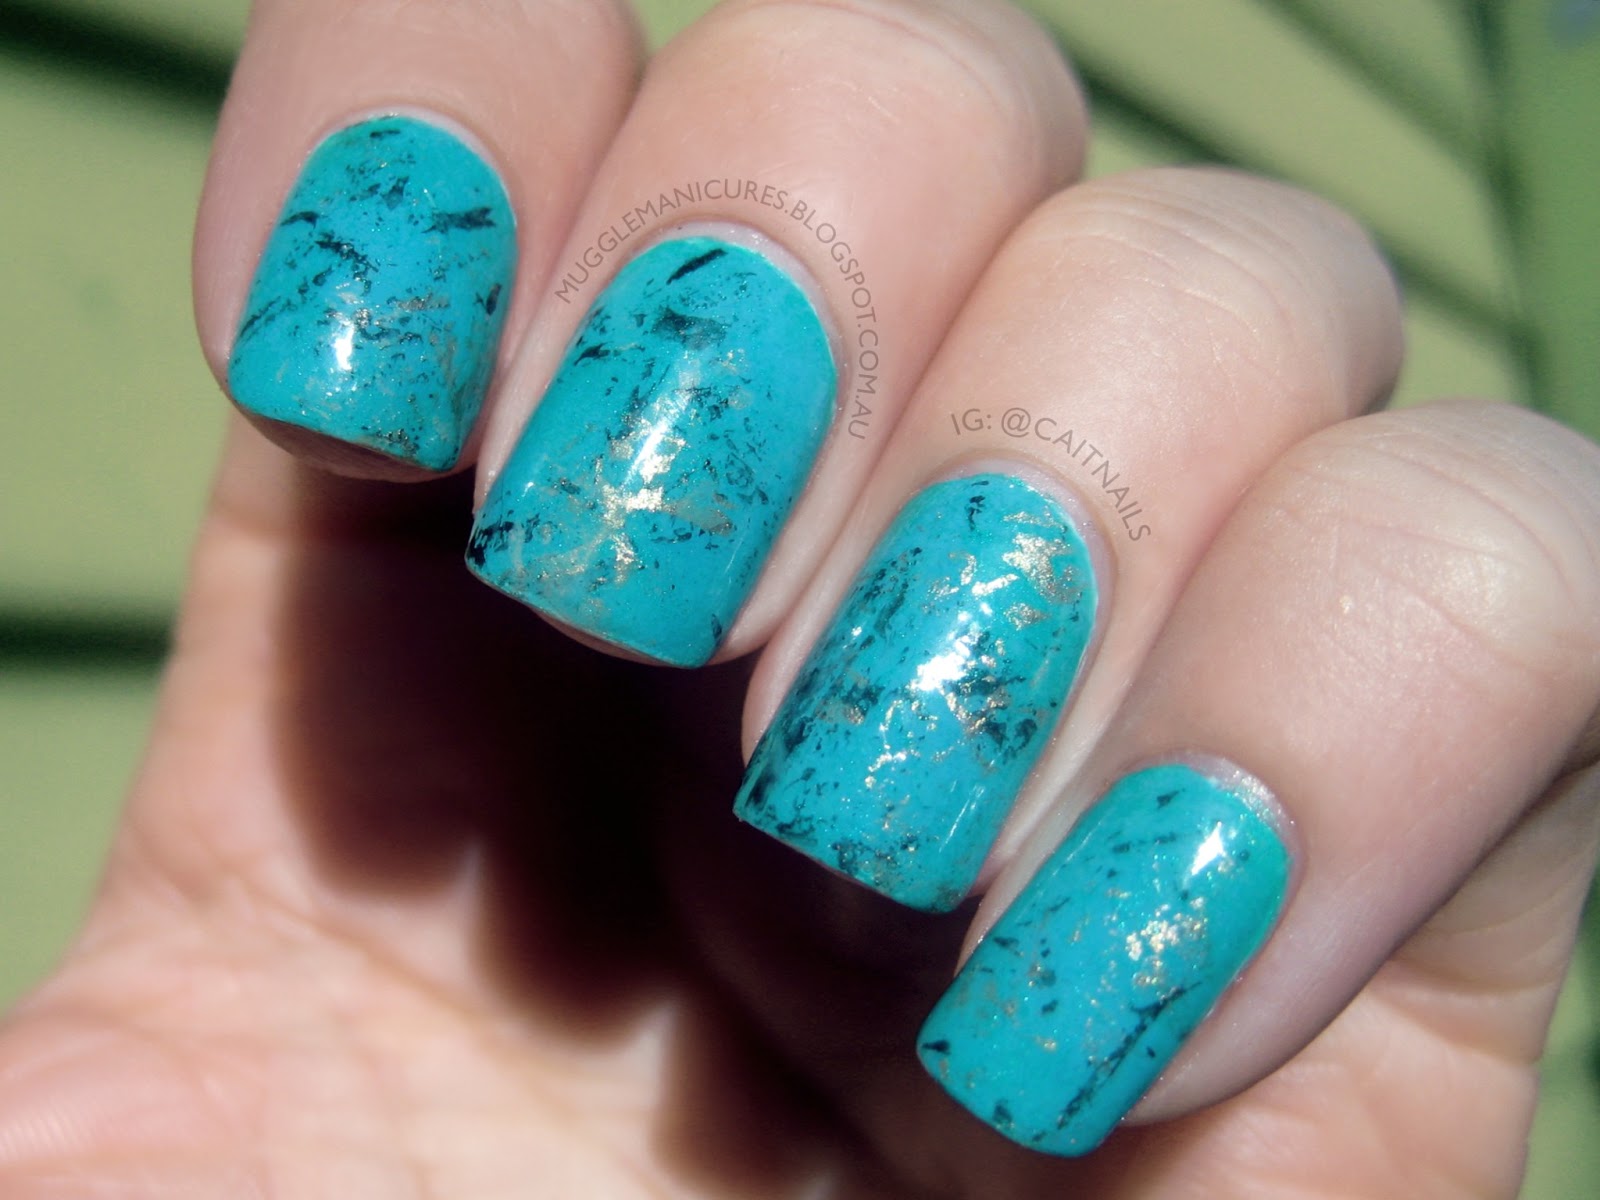 6. Ombre Stone Nails - wide 2